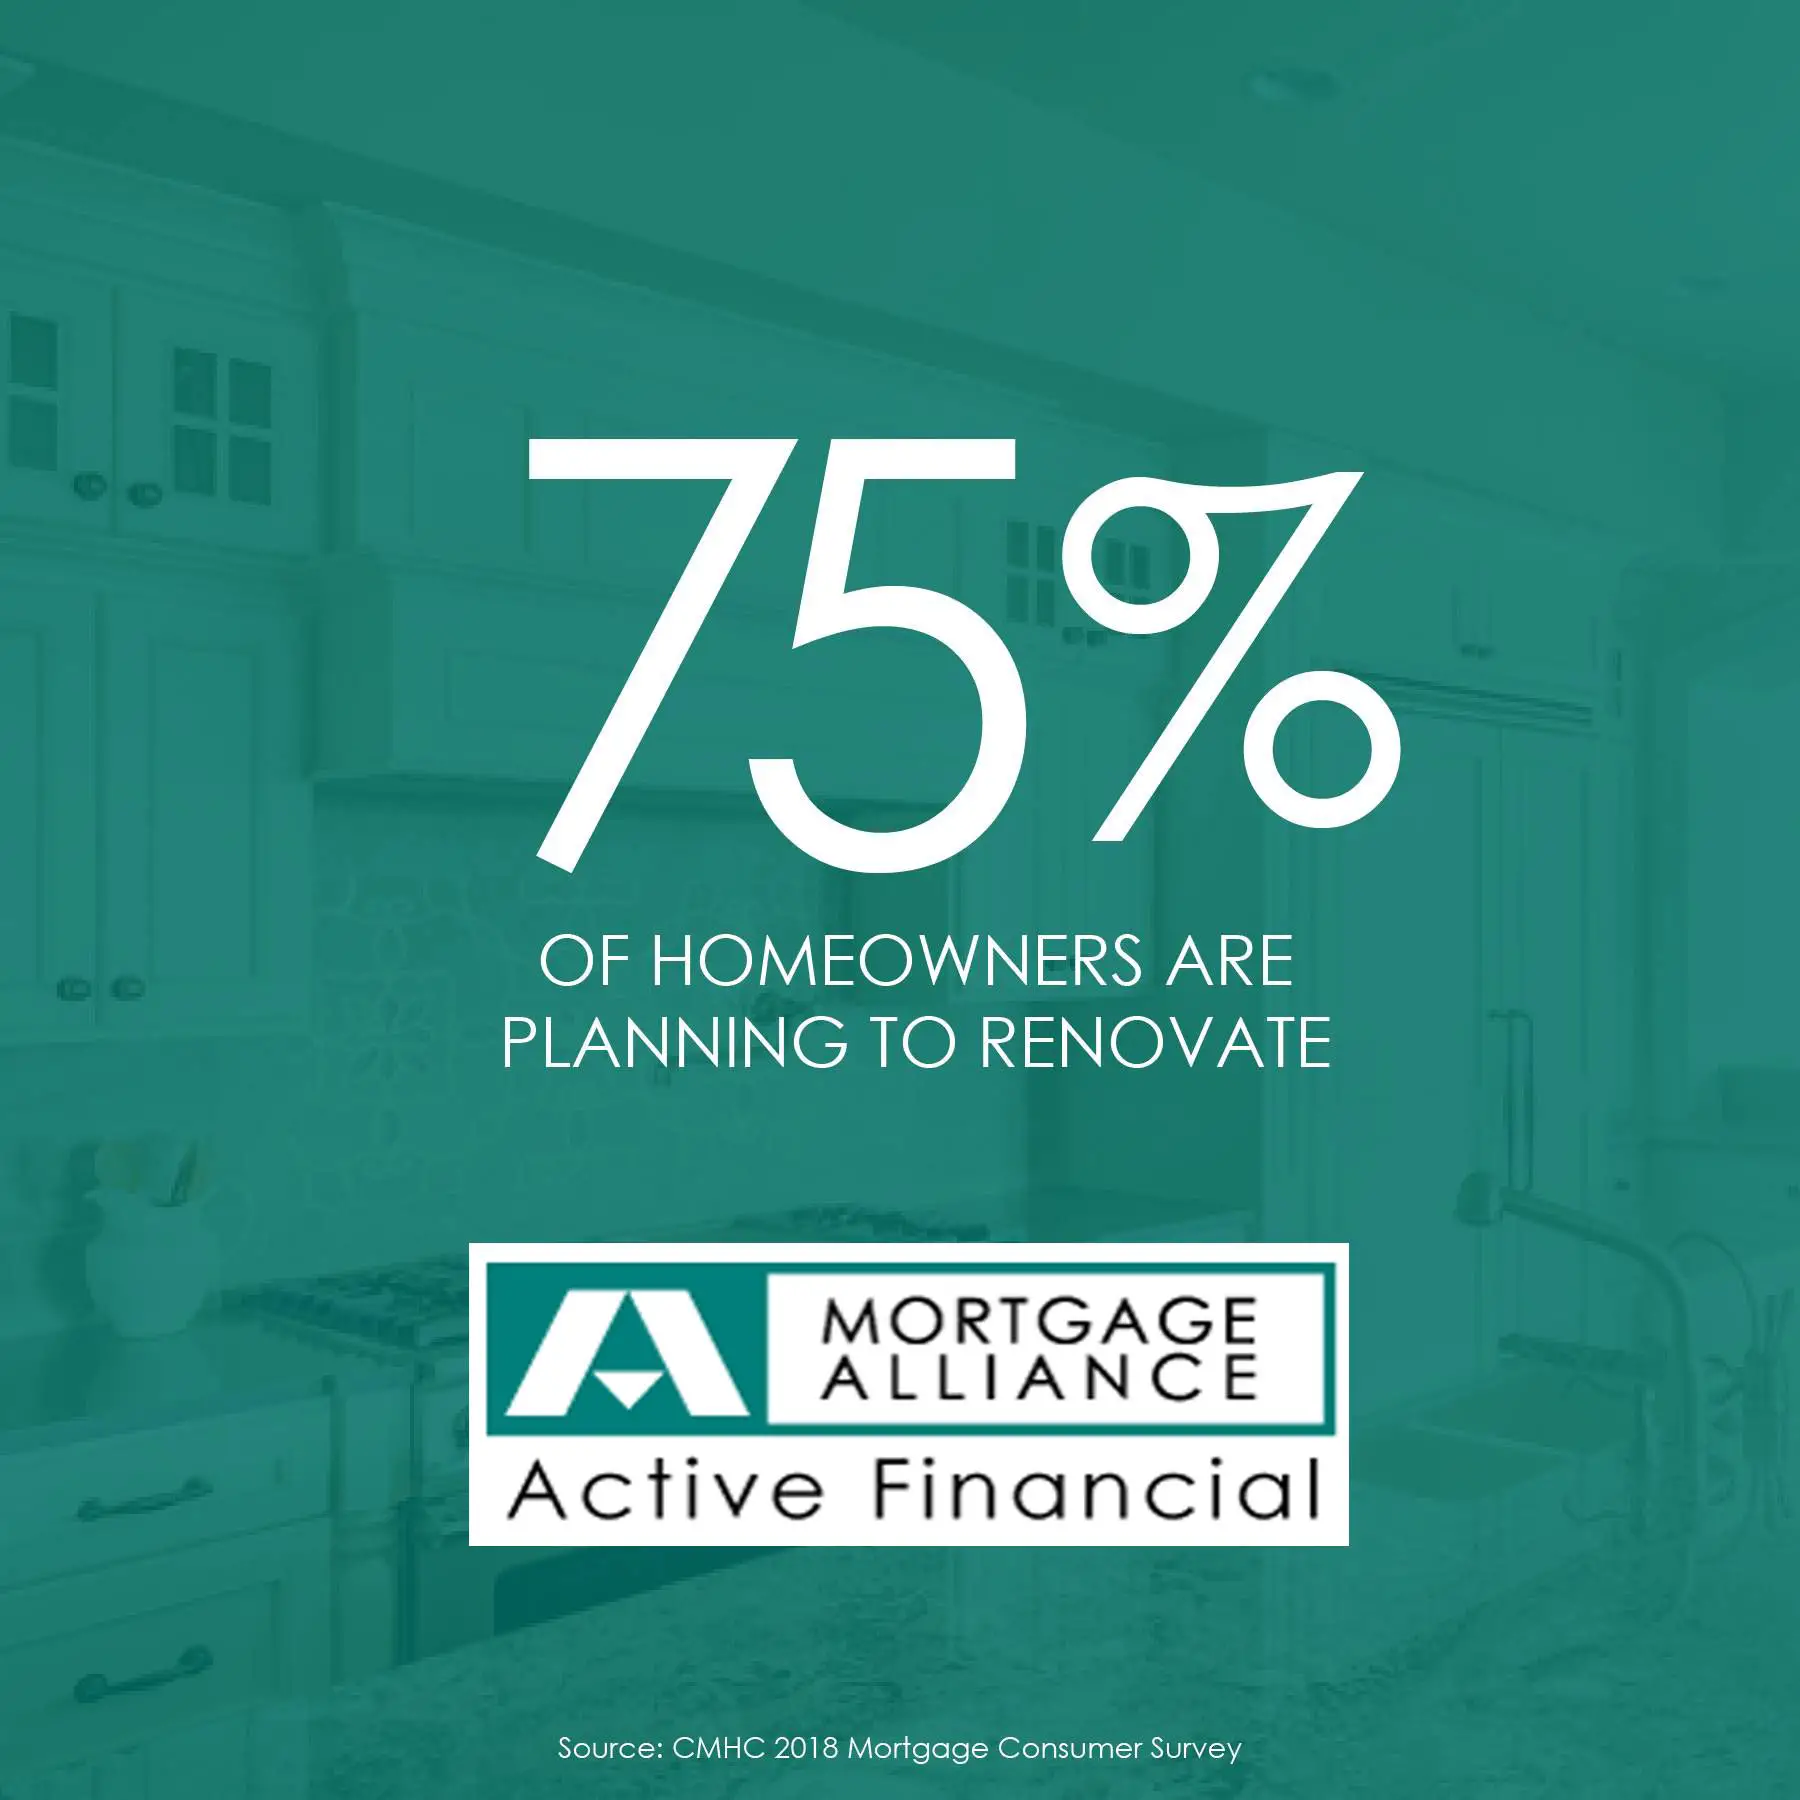 Can You Add Renovation Costs Into Mortgage